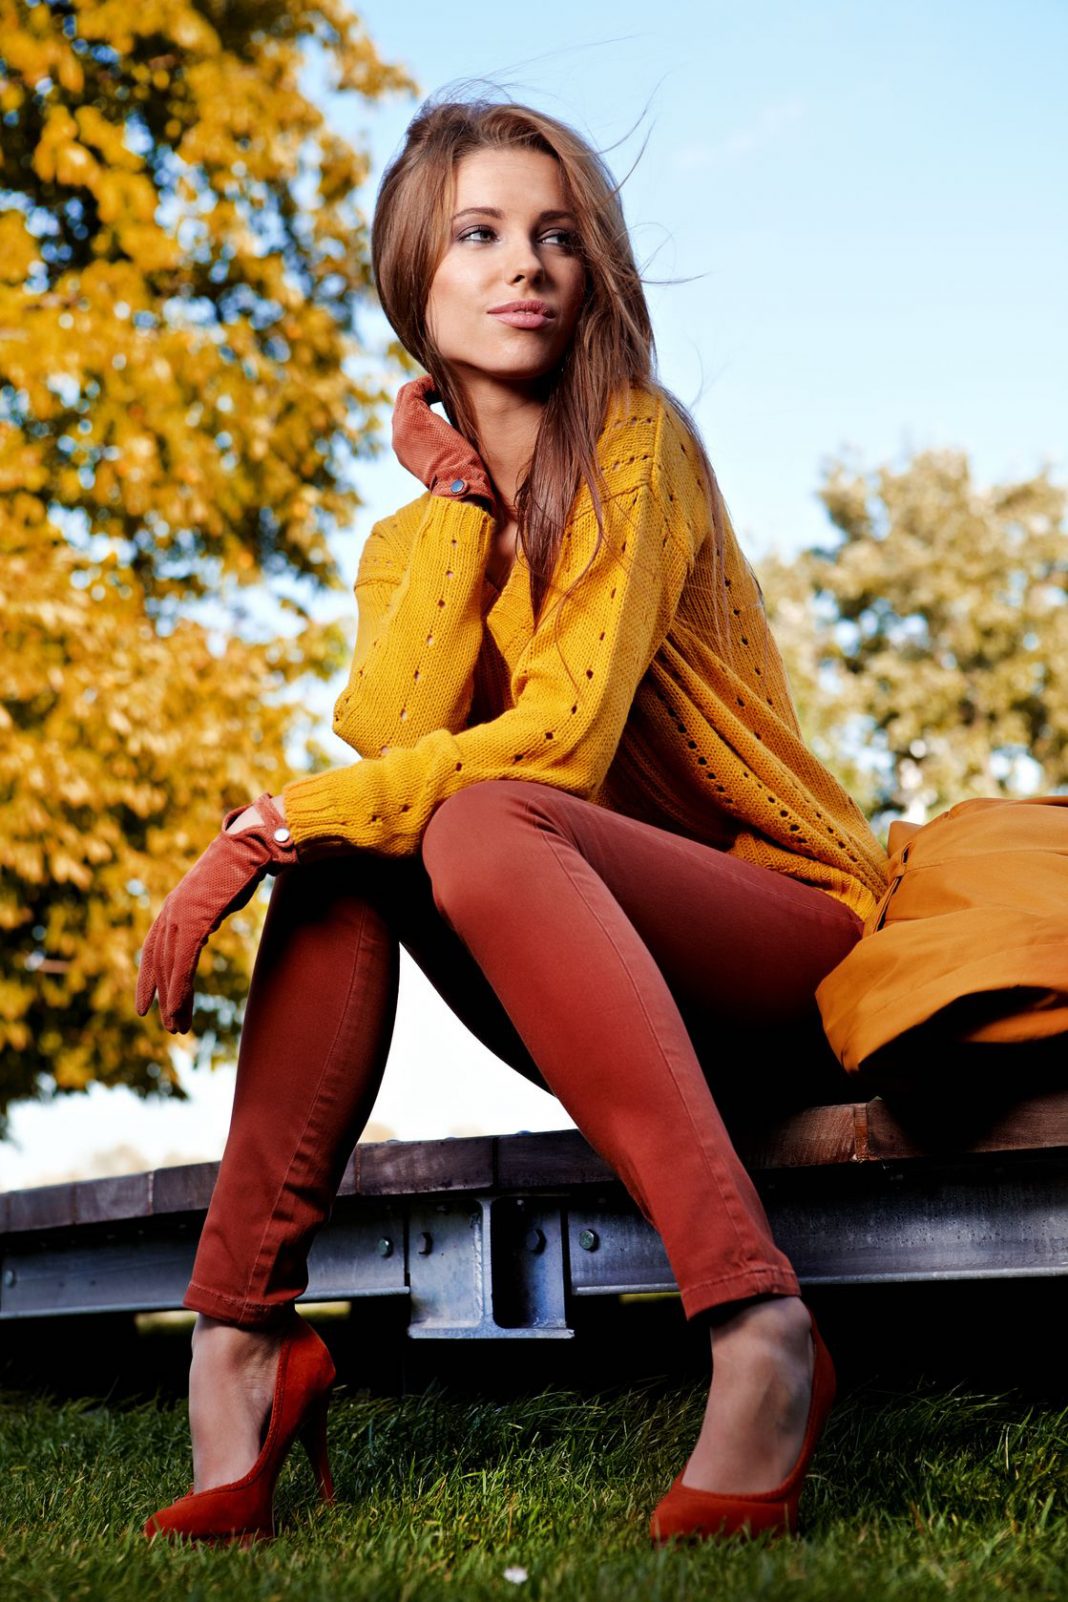 woman wearing mustard yellow sweater and marron red pants posing outdoors in fall autumn